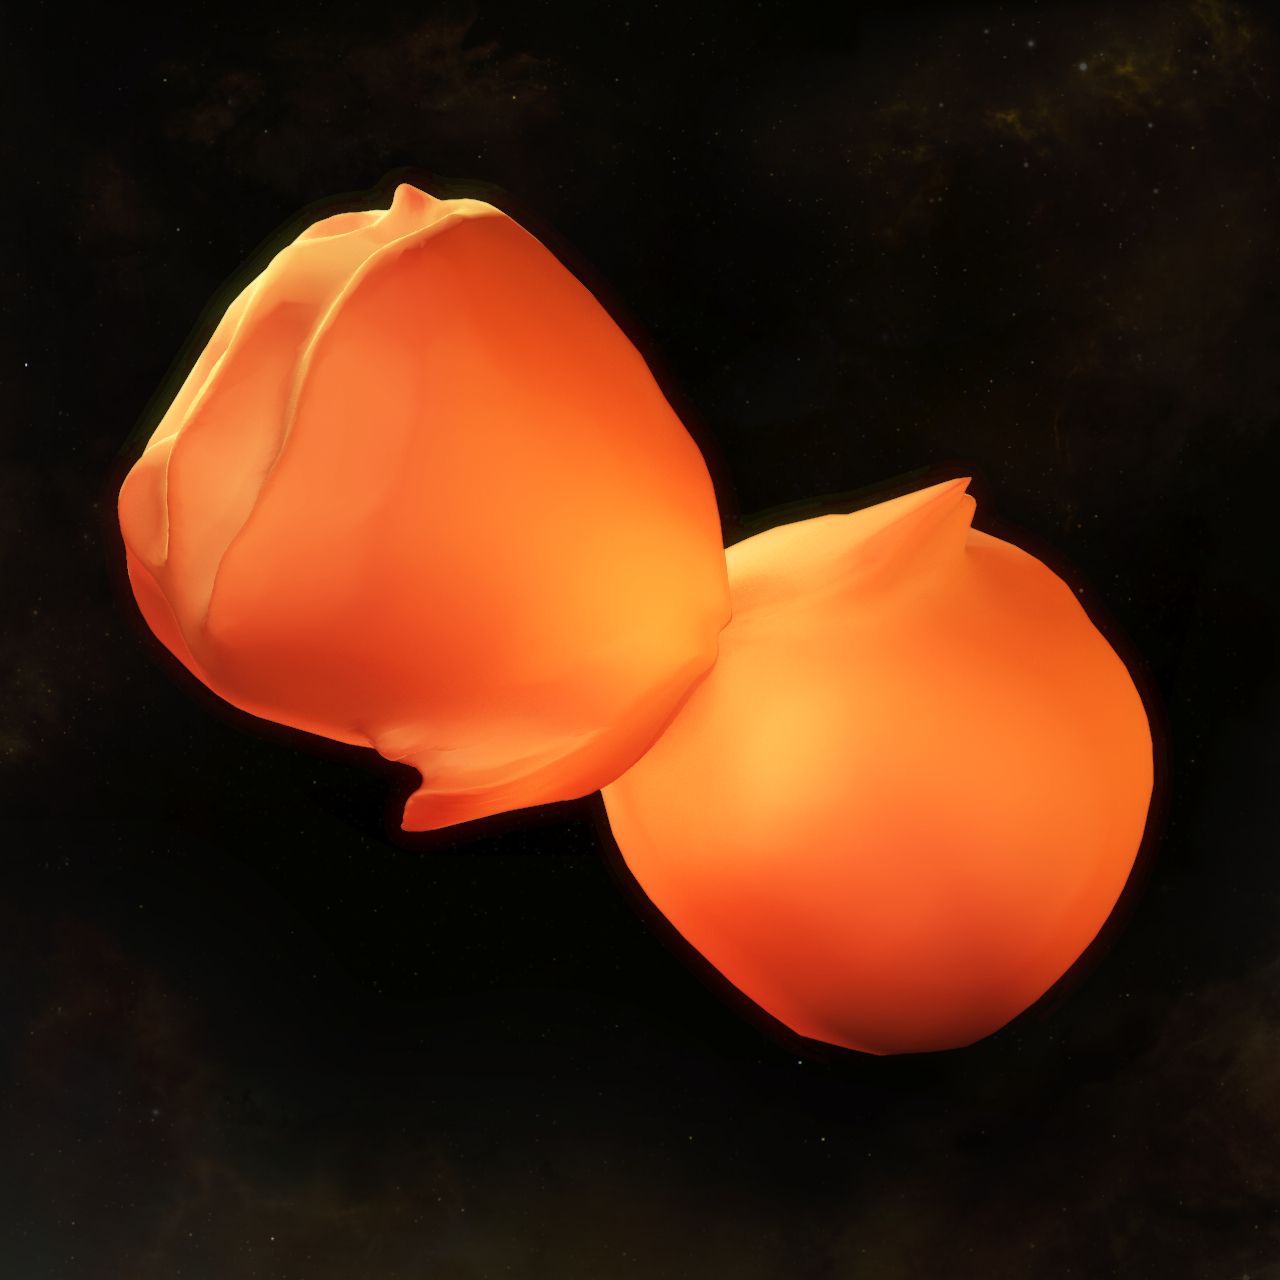 Preview Image for Eta Carinae's Homunculus Nebula Now in 3D